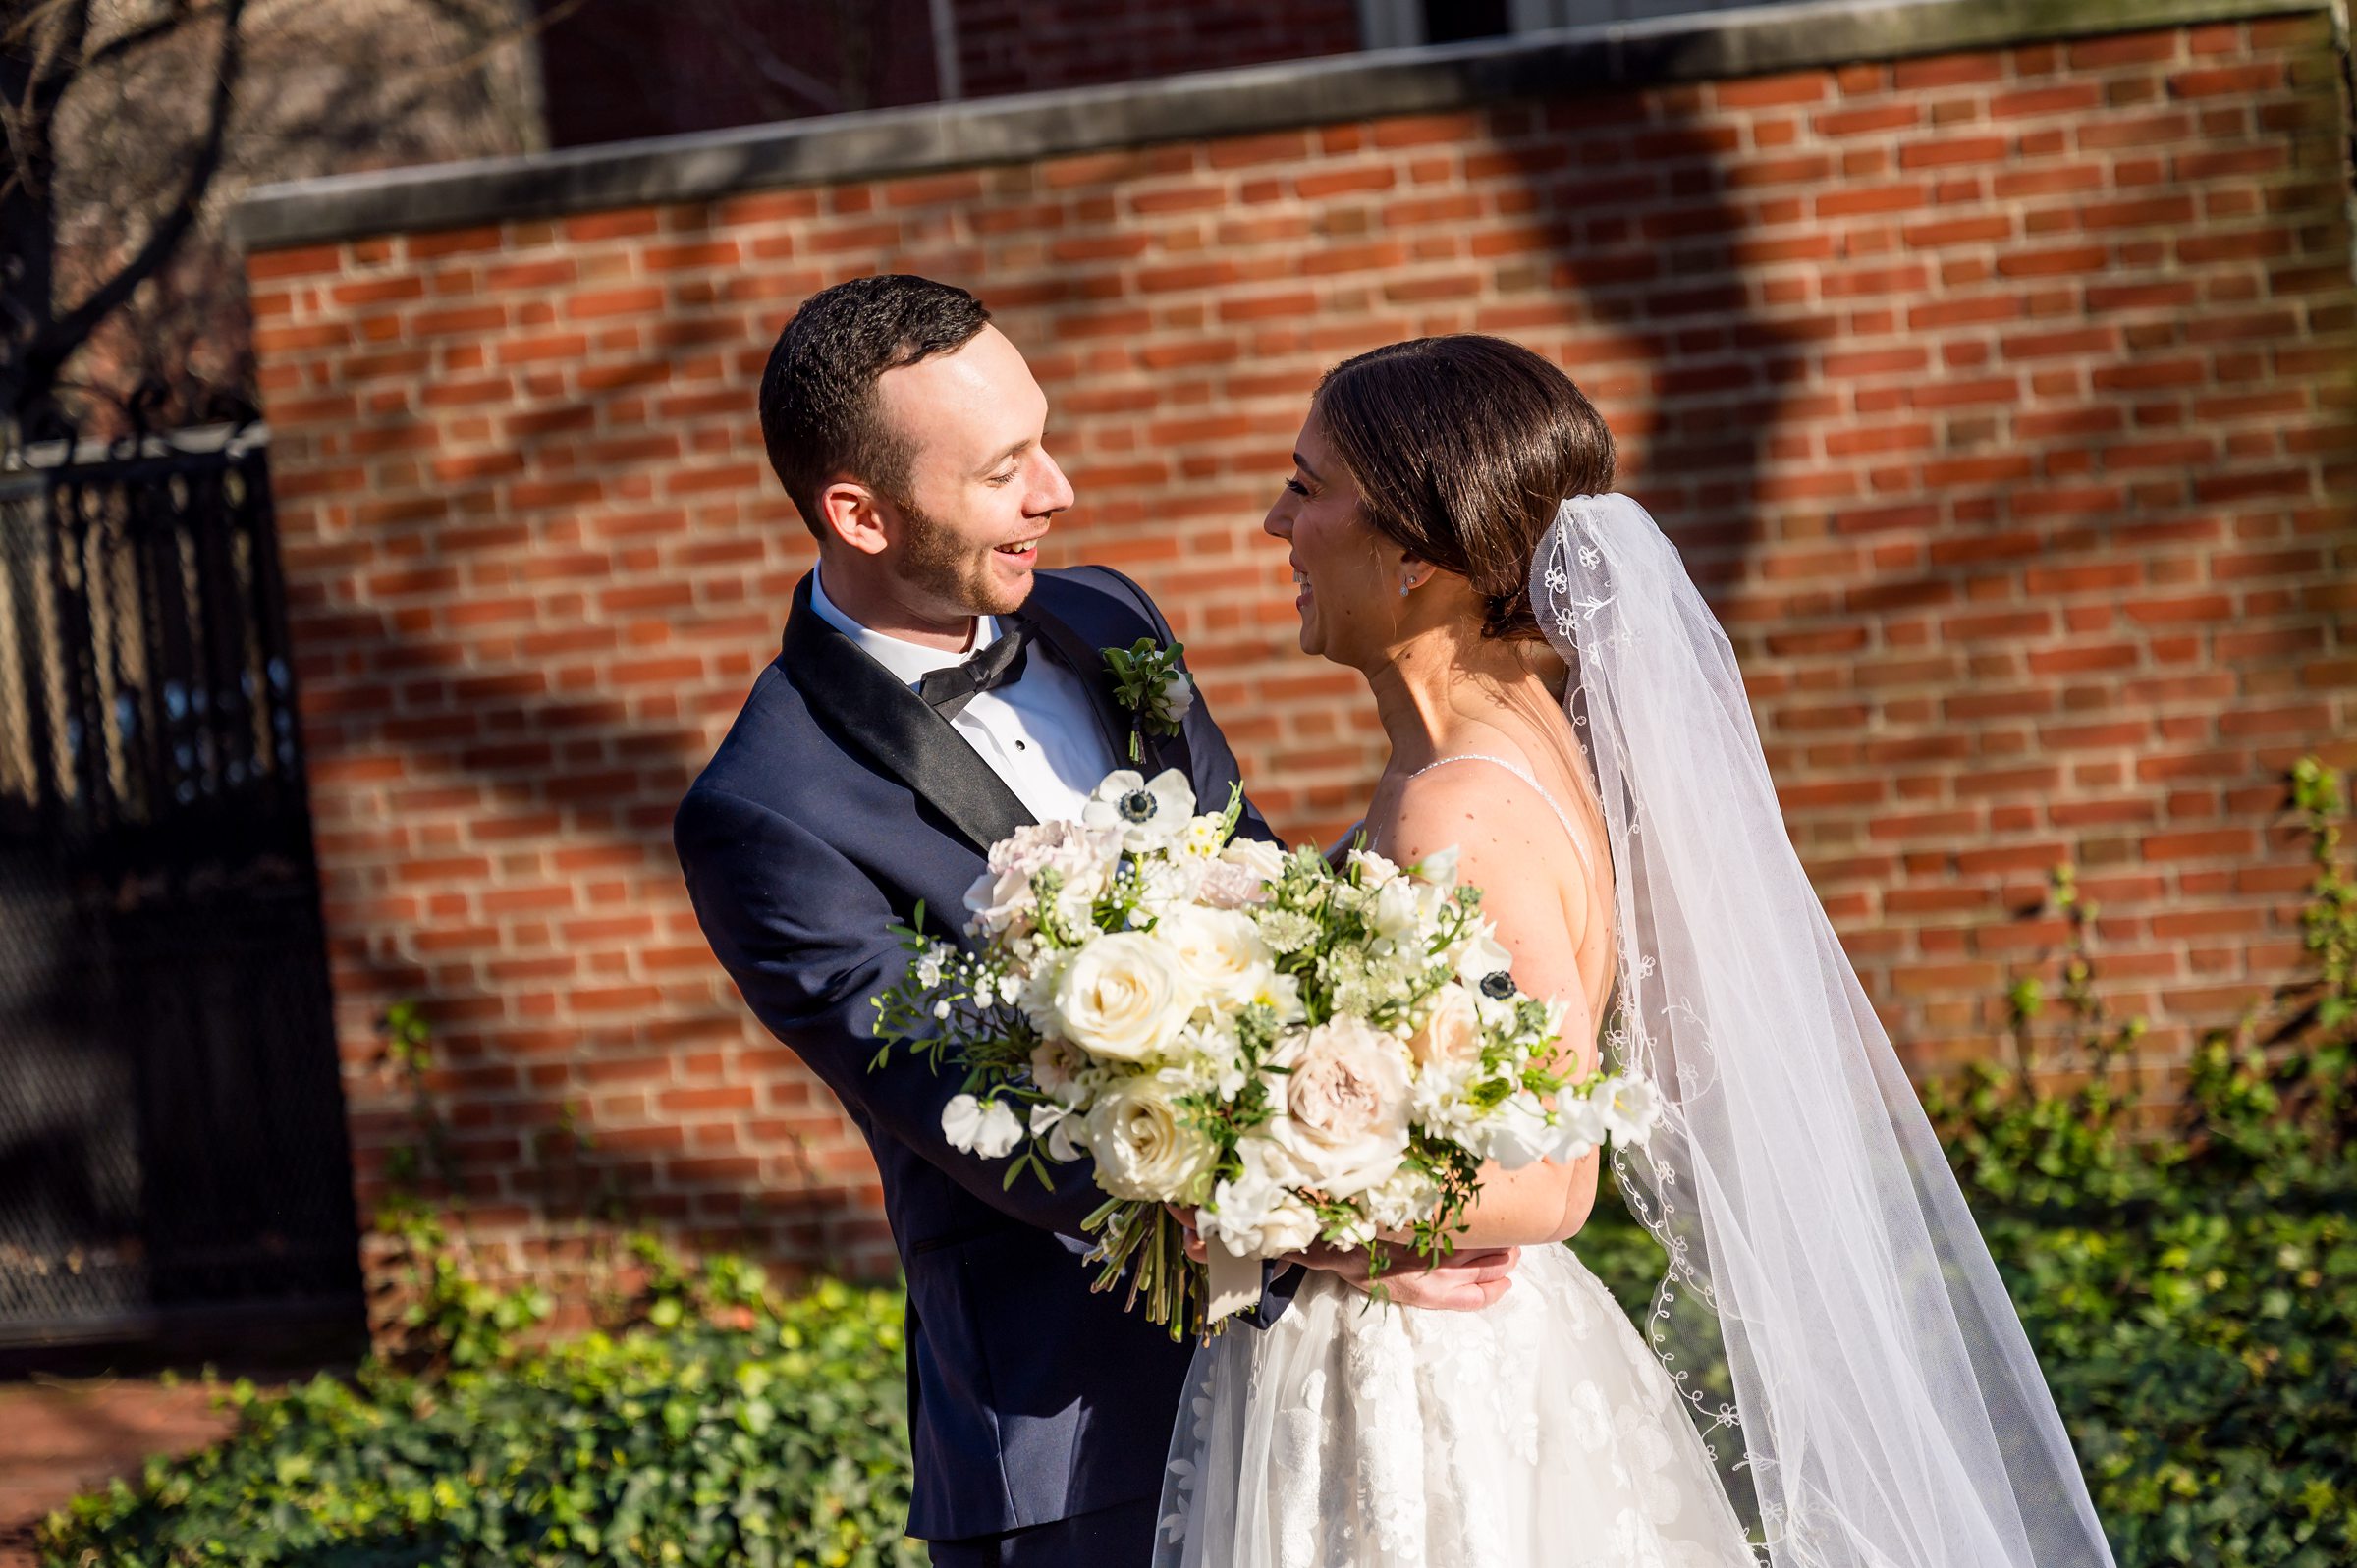 A bride and groom stand gracefully in front of a brick building.